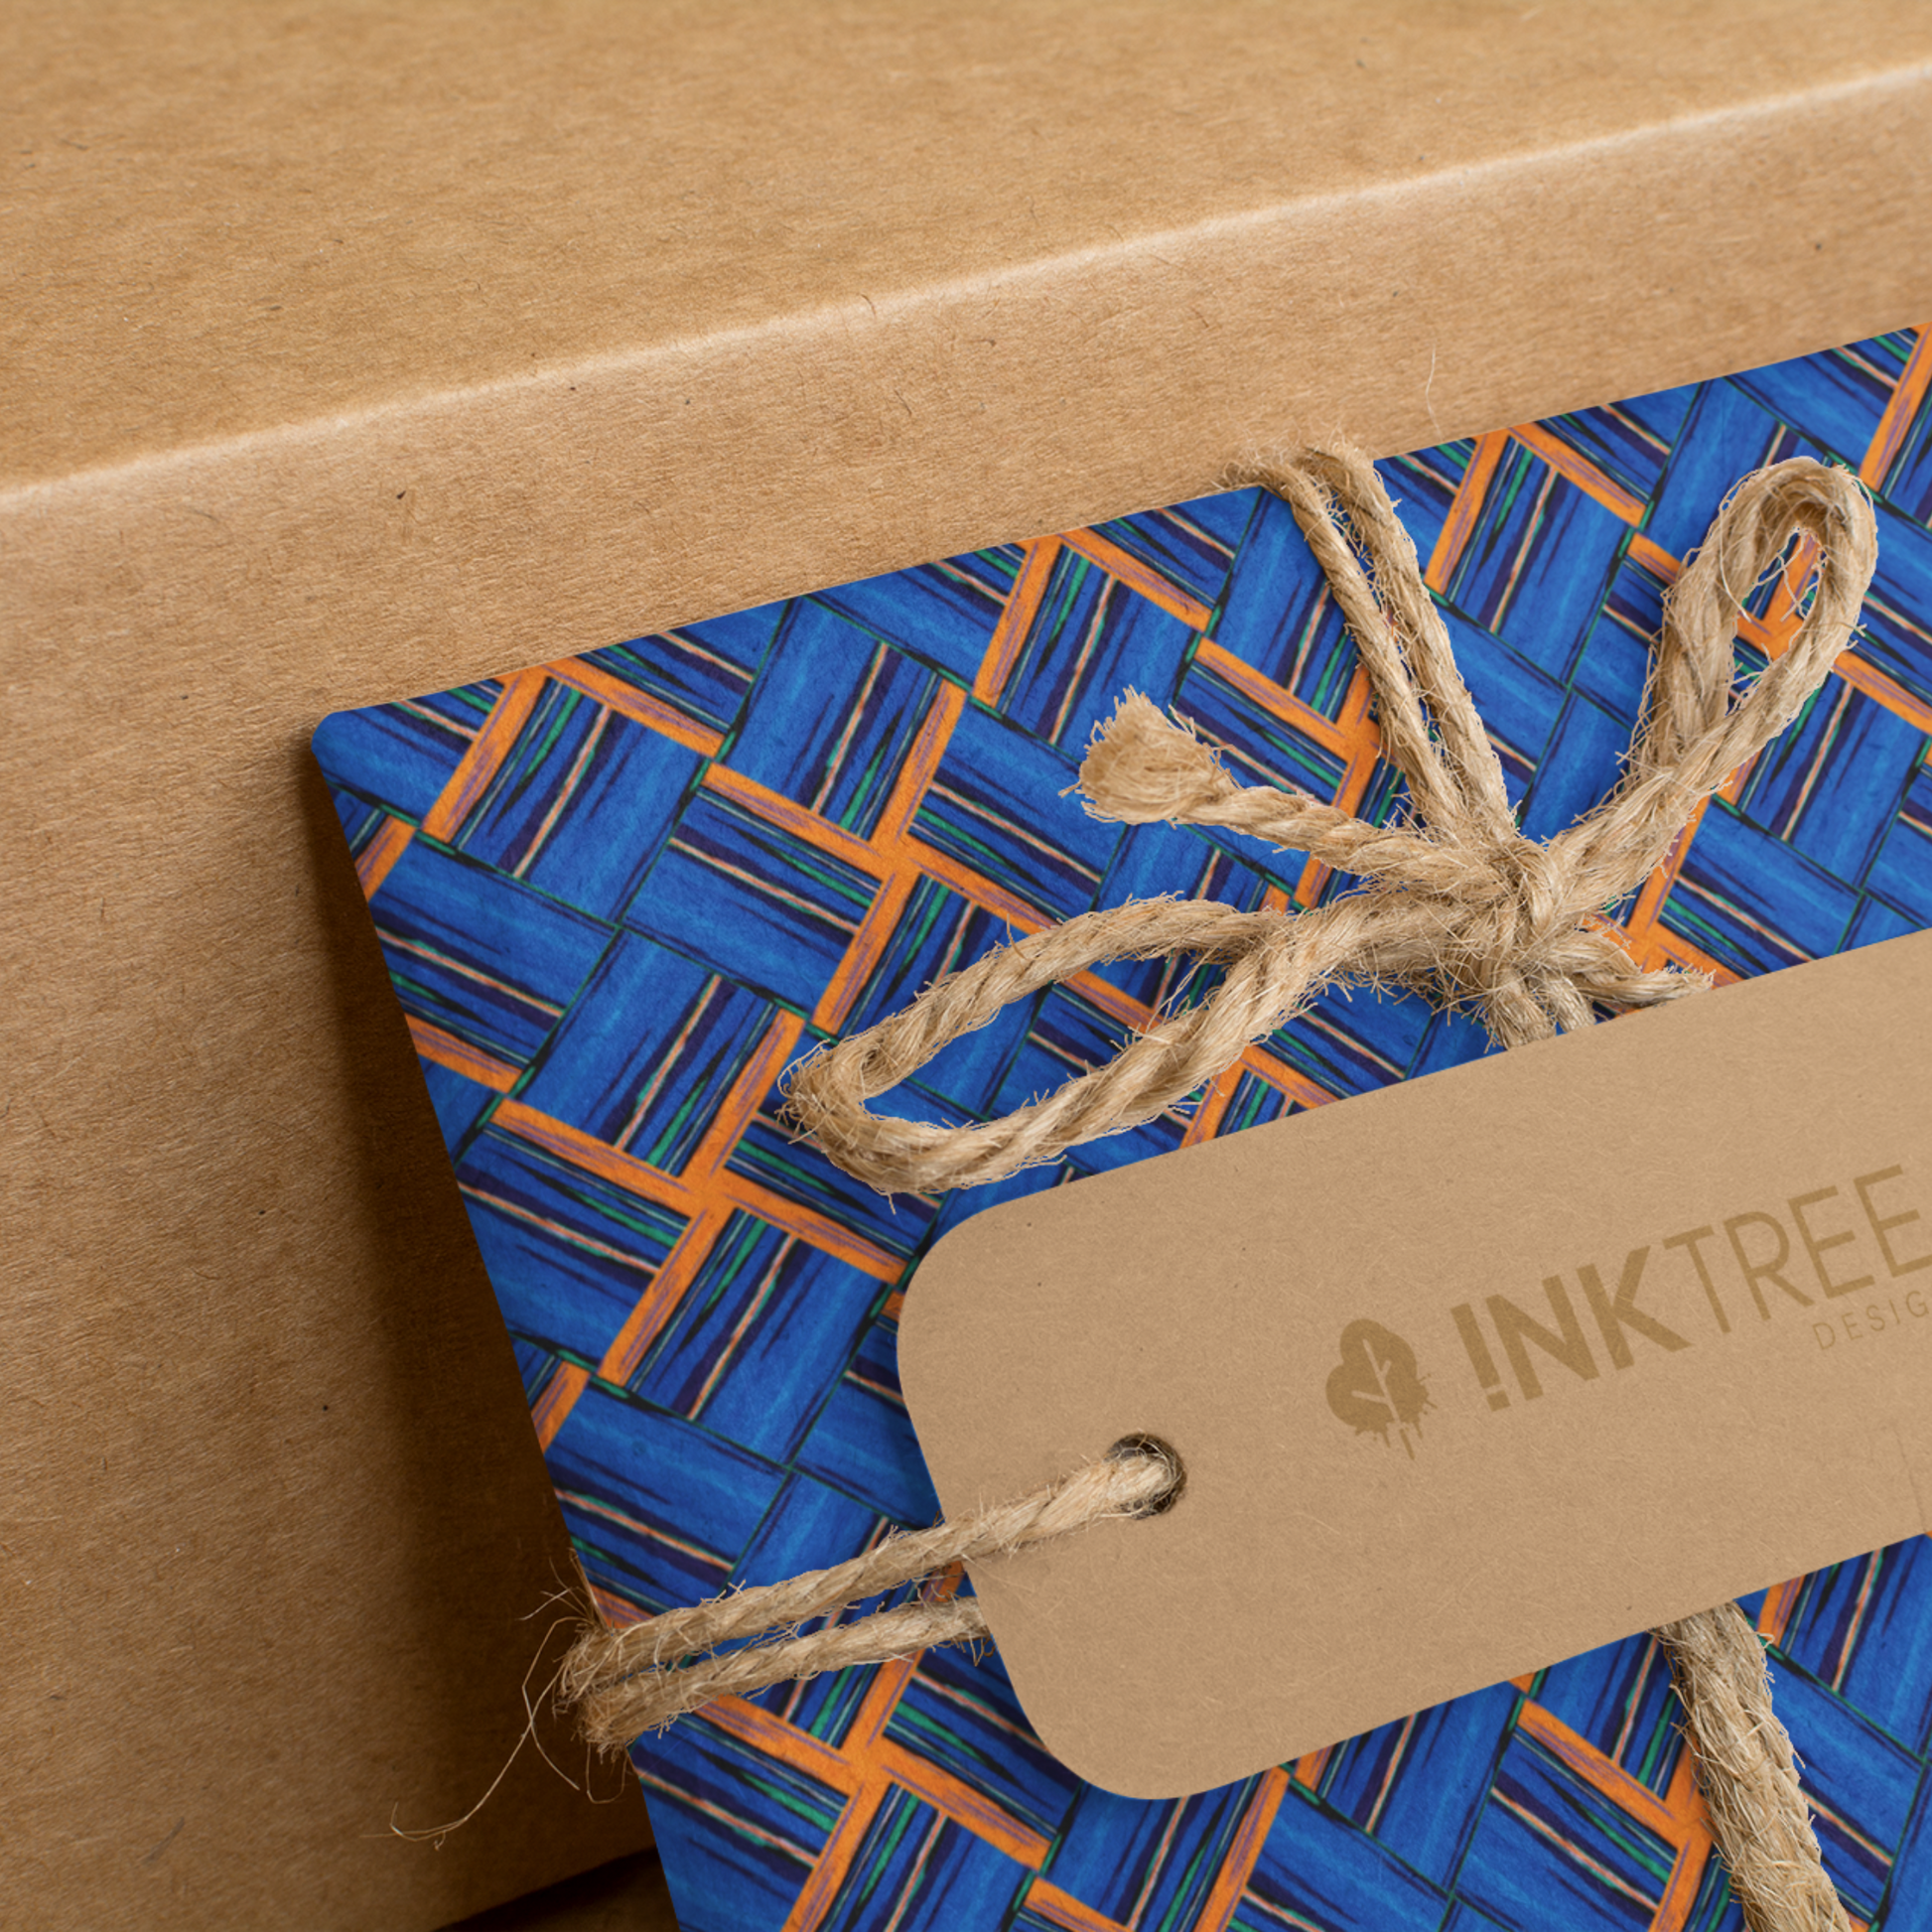 A present wrapped with an orange, white, black, blue and green square pattern, tied with brown string with a brown paper tag with ink tree design logo on it, leaning on a brown paper background.